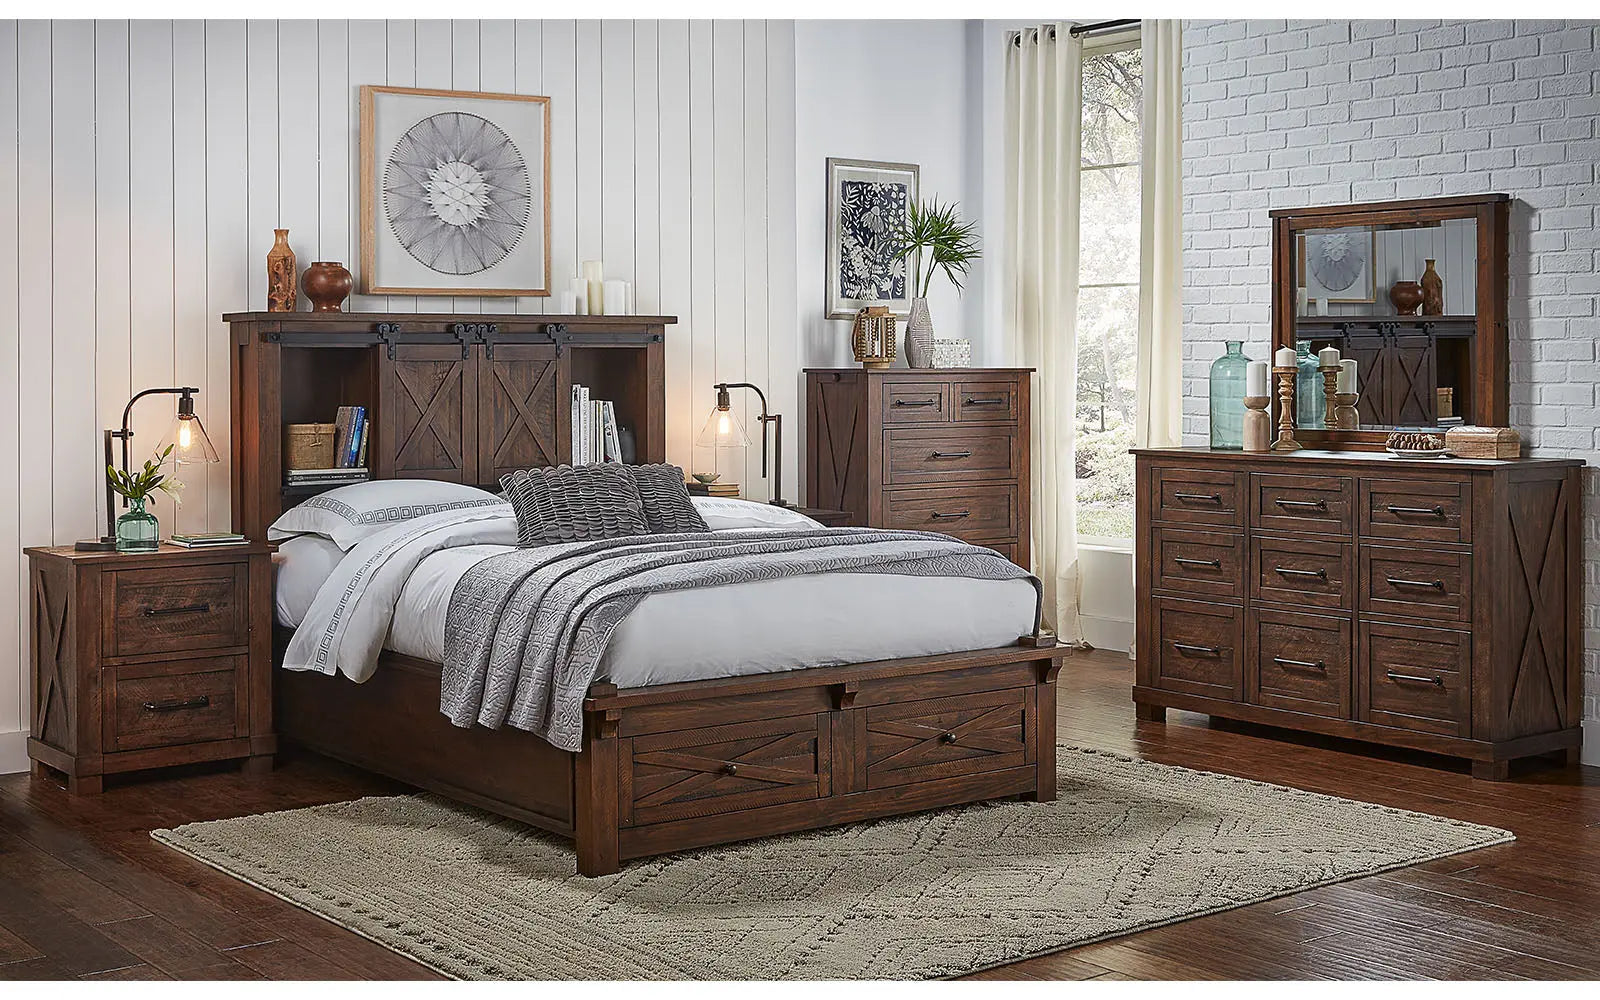 Sun Valley Rustic Timber Queen Storage Hdbr W/ Storage Footboard A-America